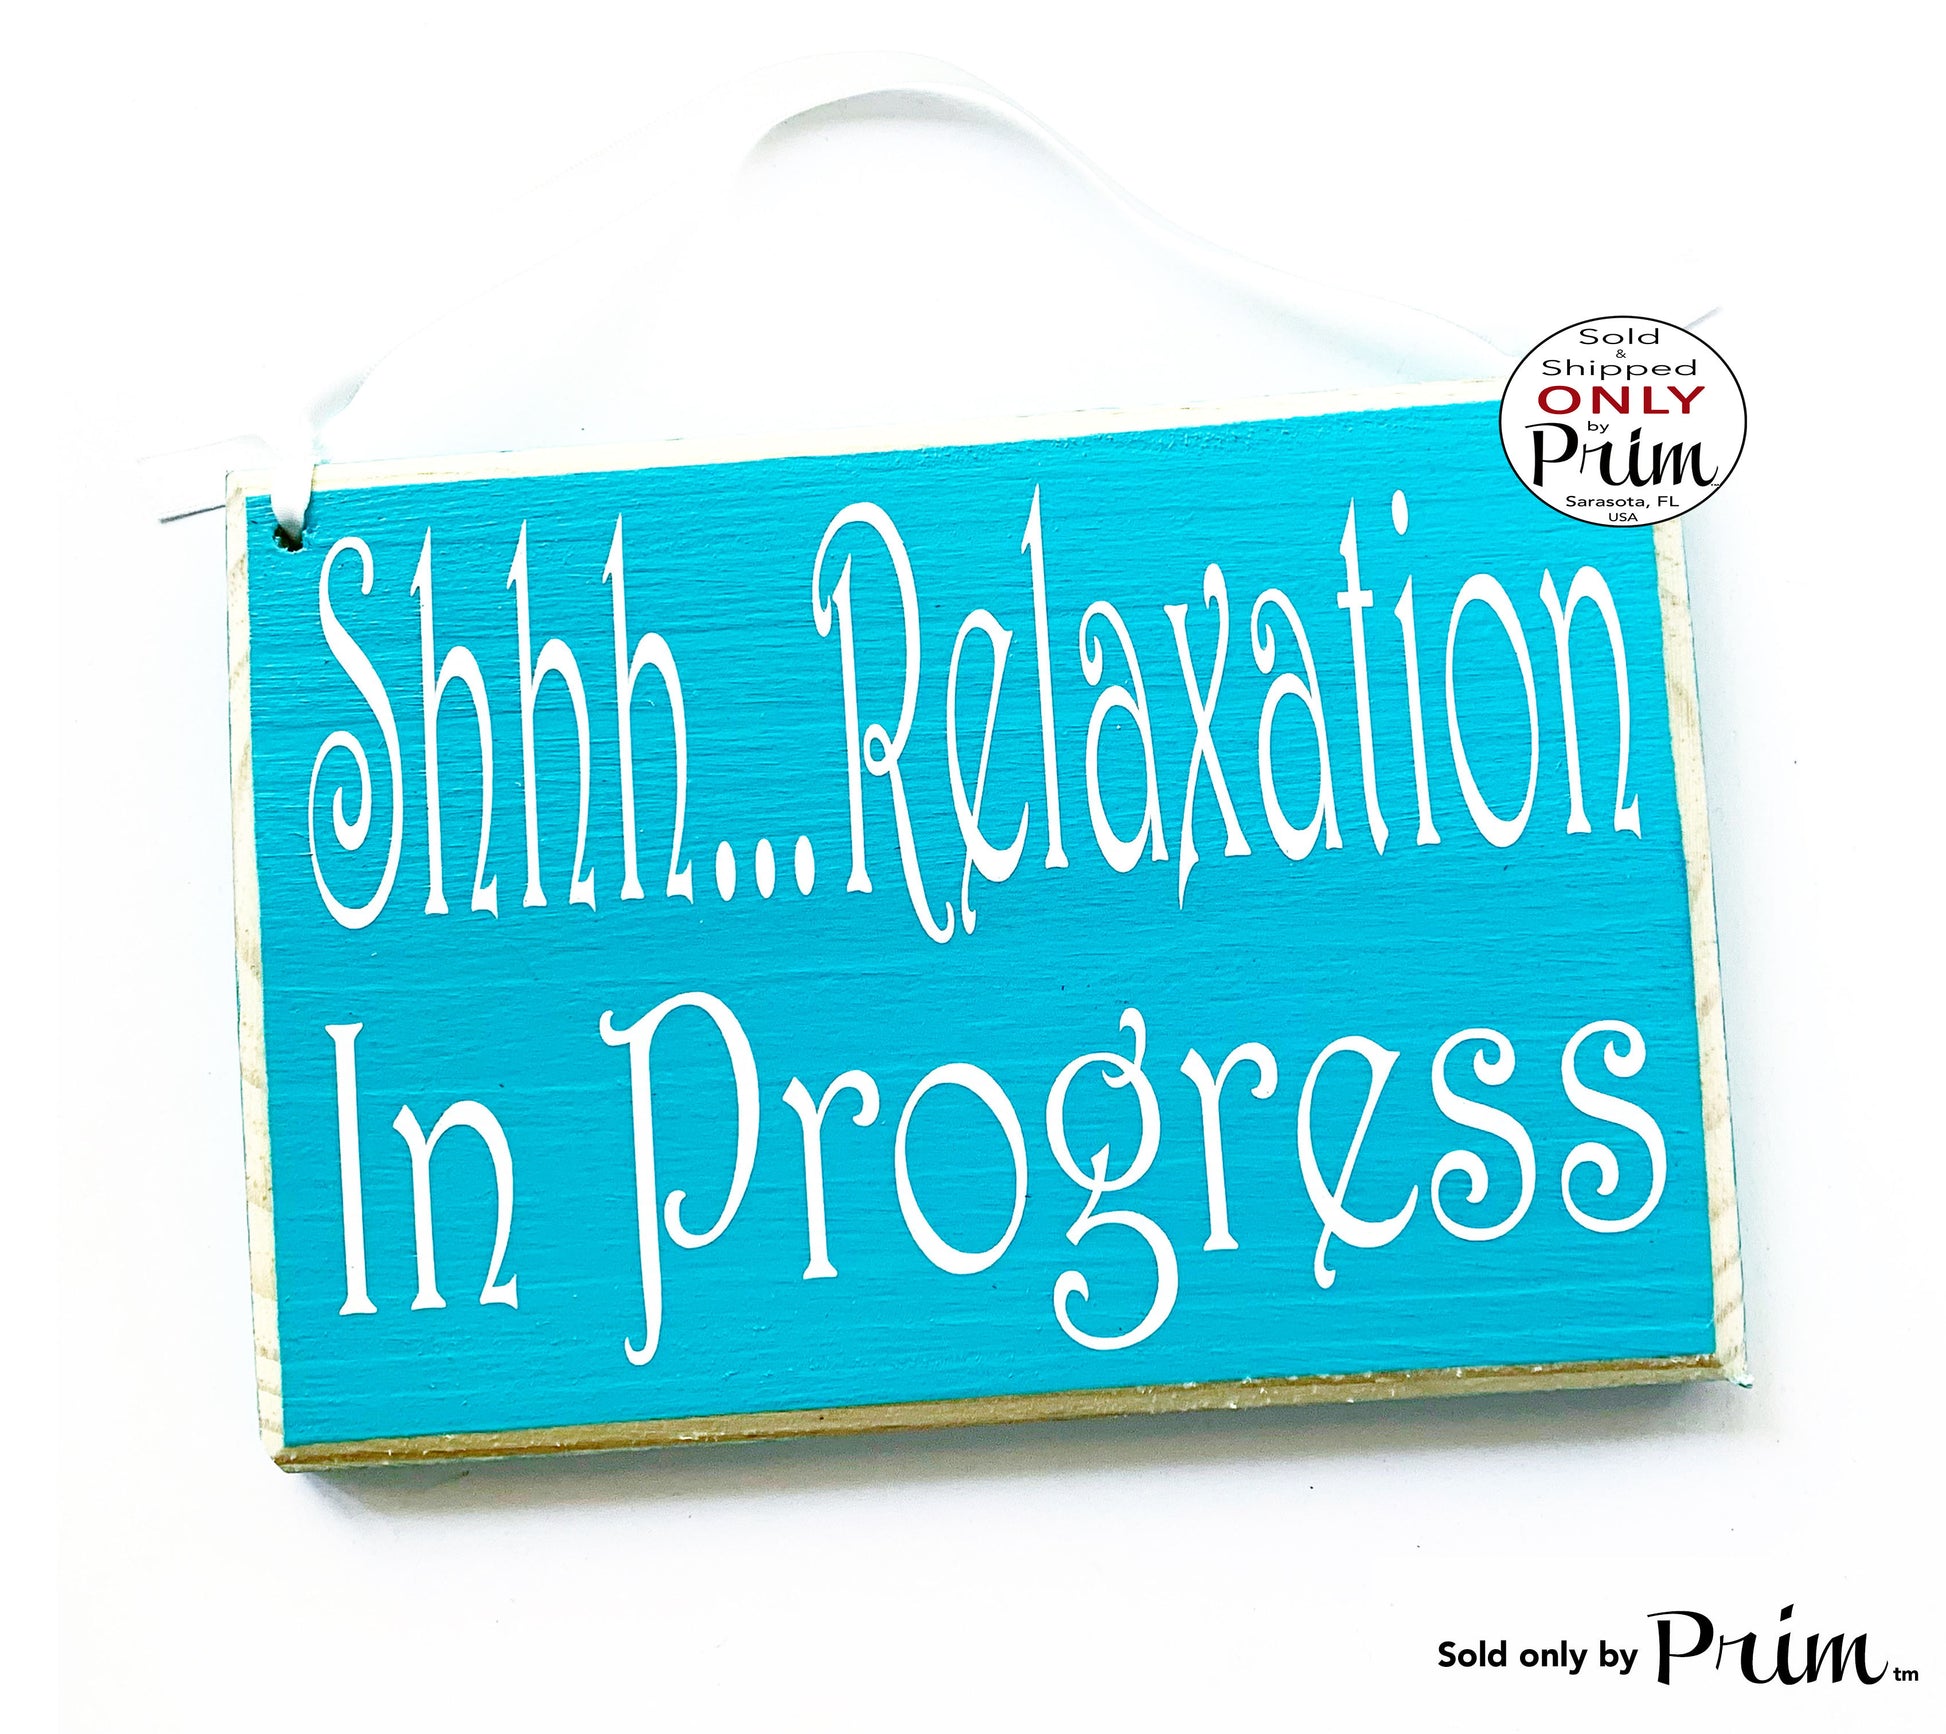 8x6 Shhh Relaxation In Progress Session Custom Wood Sign | Do Not Disturb Spa Salon Quiet Soft Voices Office Spa Service Wall Door Plaque Designs by Prim